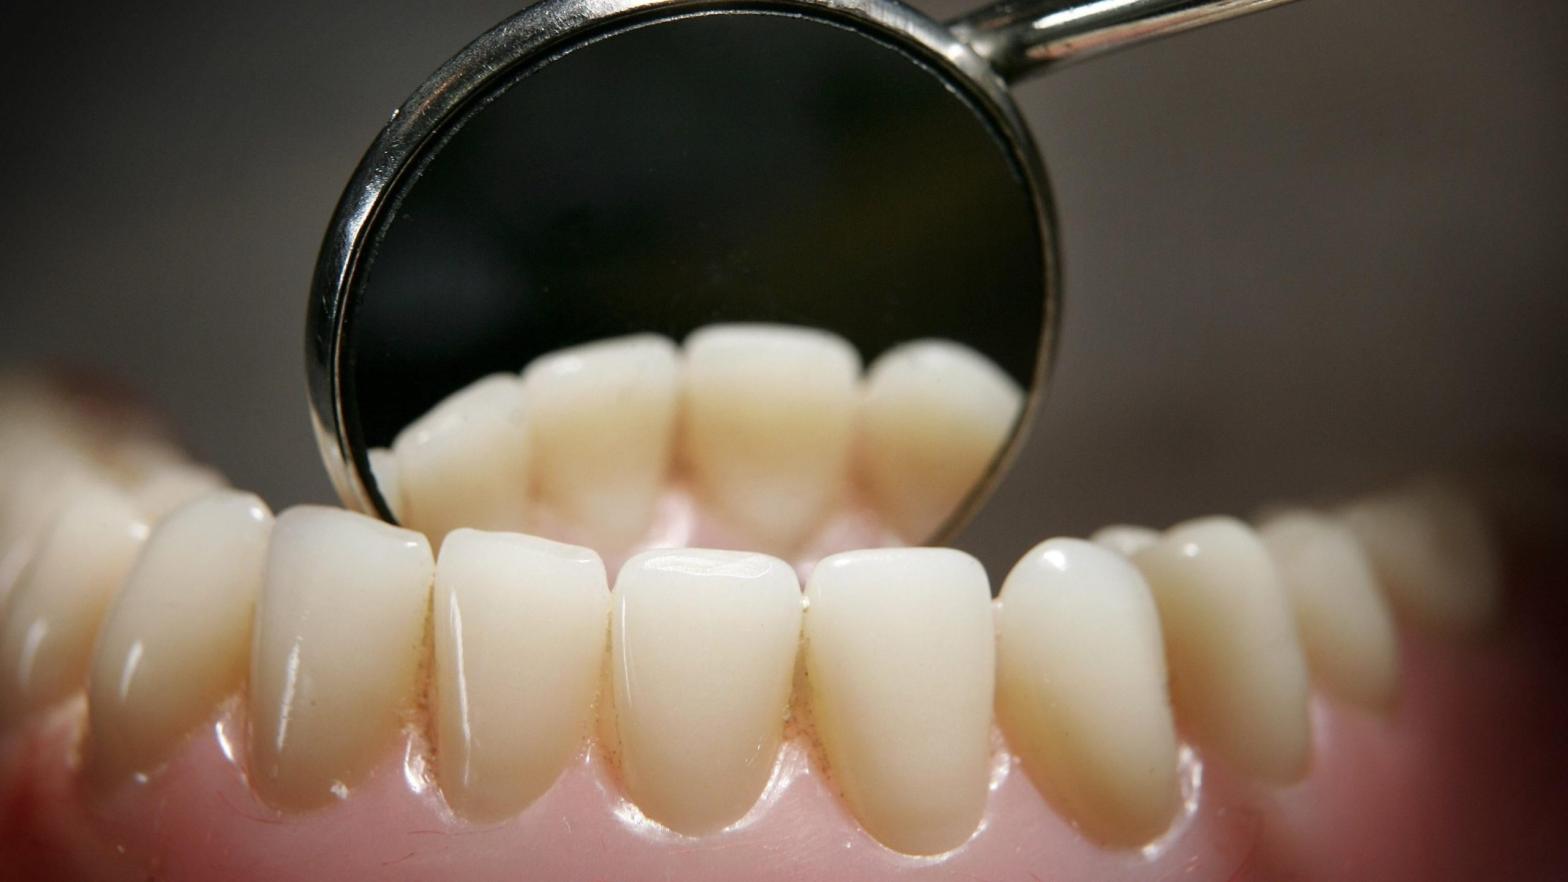 Teeth on a model denture set are reflected in a dental mirror on April 19, 2006 in Great Bookham, England. (Photo: Peter Macdiarmid, Getty Images)